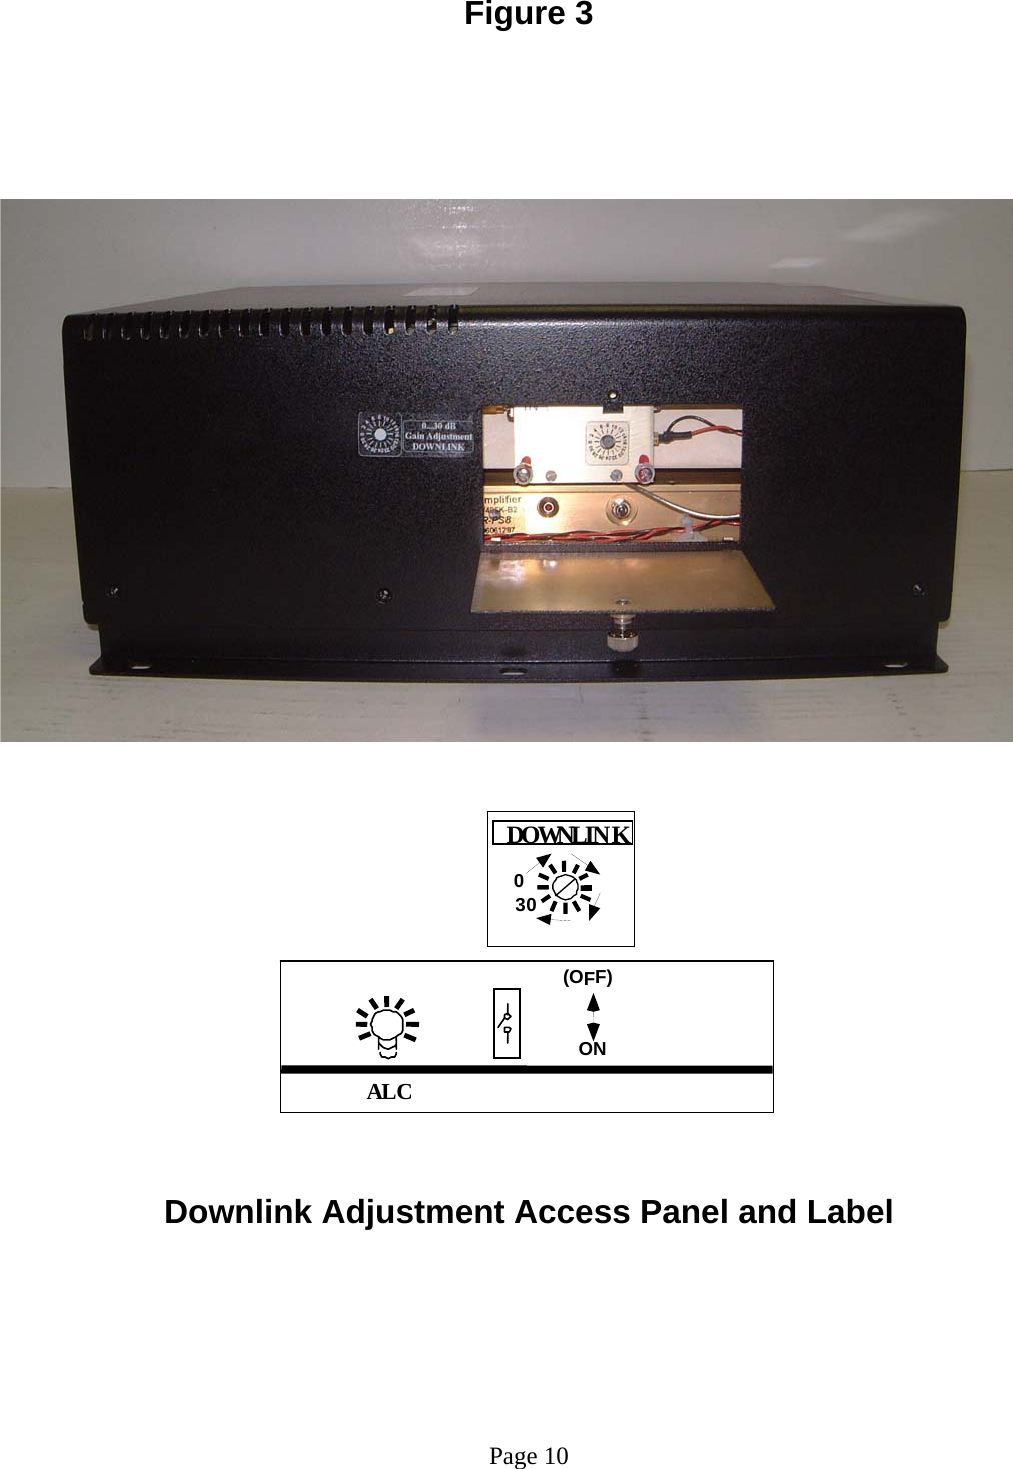 Figure 3                                                          Downlink Adjustment Access Panel and Label       Page 10 030DOWNLINK (OFF)ONALC